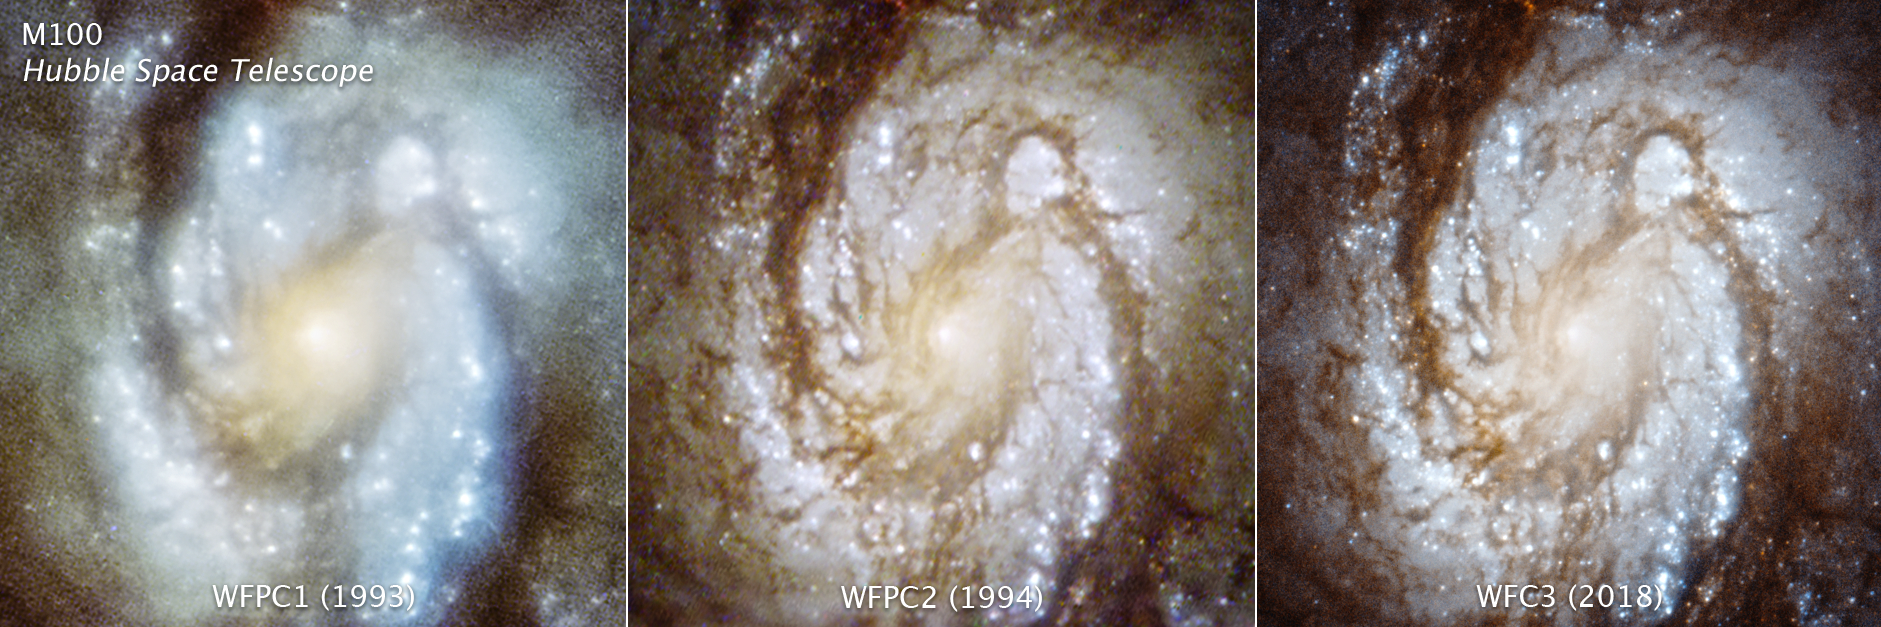 three images of the same galaxy, different resolutions